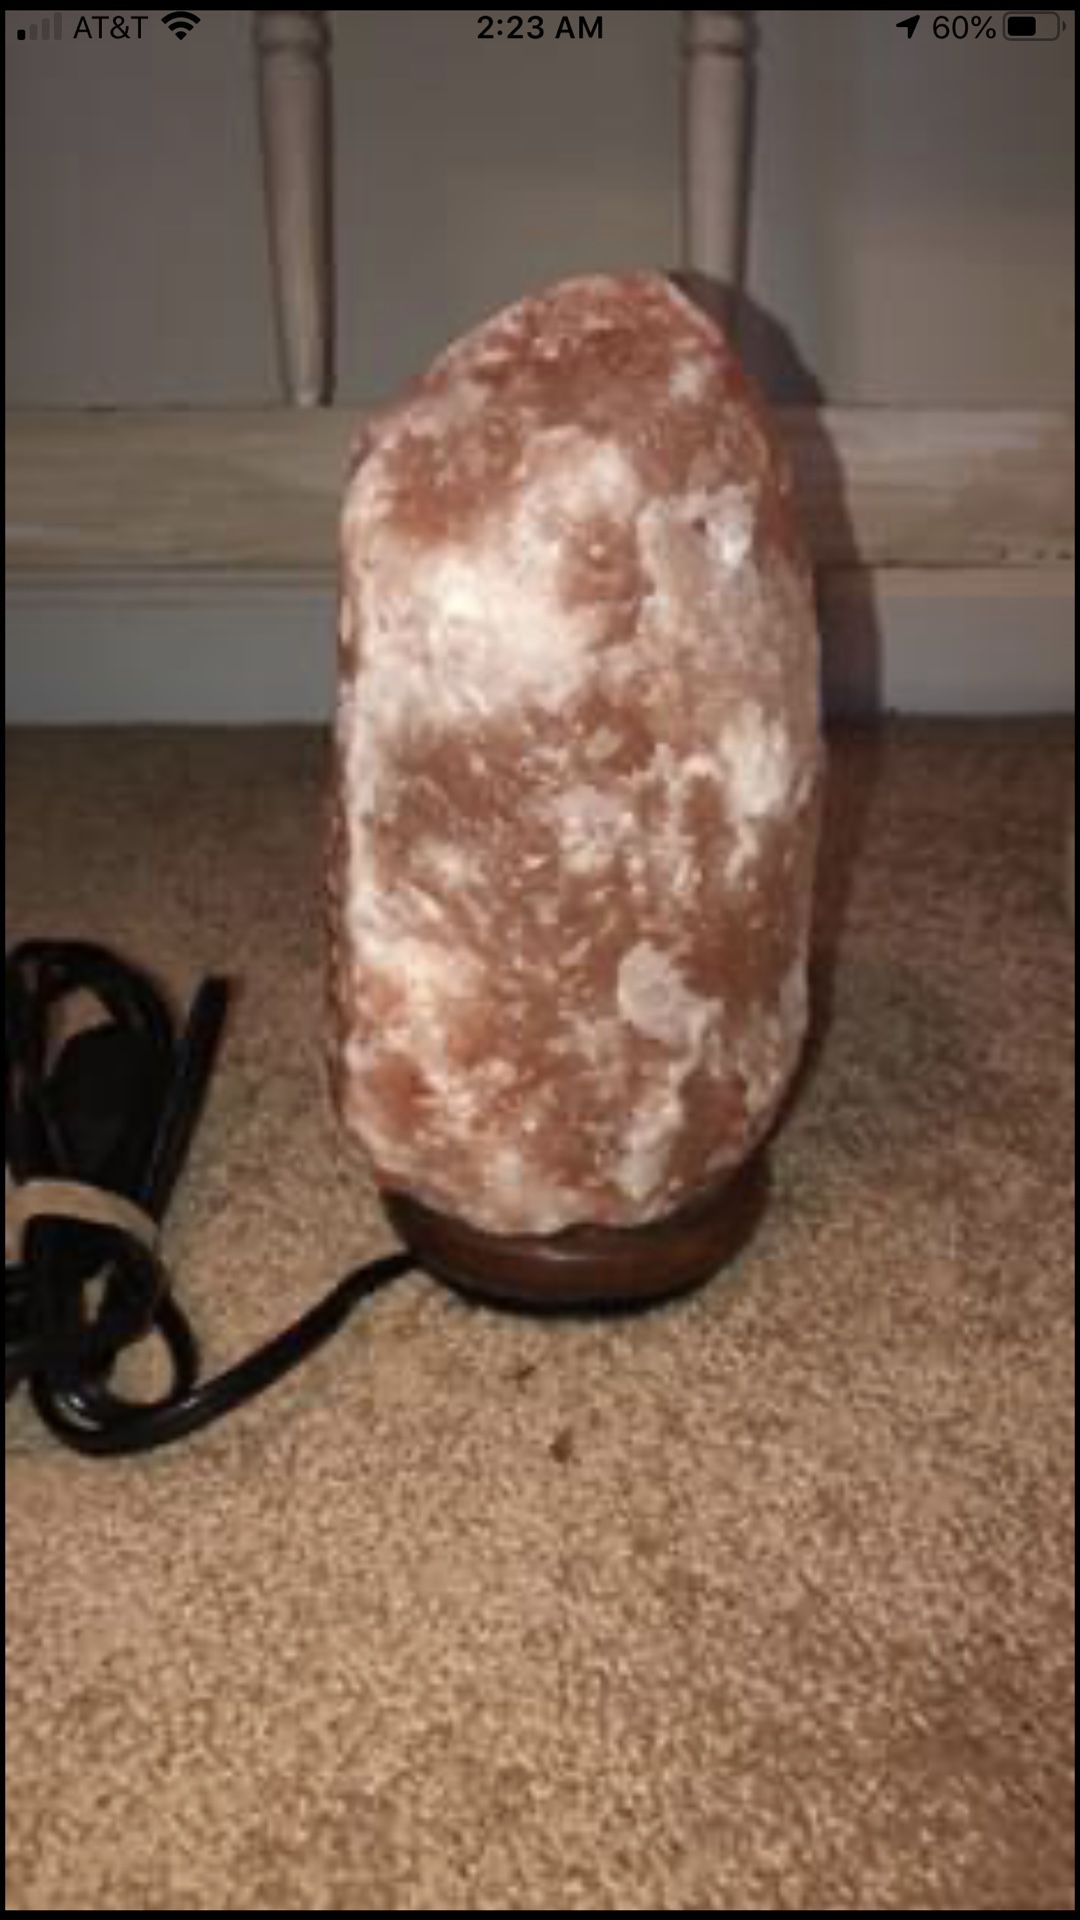 Himalayan Salt Lamp for Health w/ New Bulb & Dimmer Switch